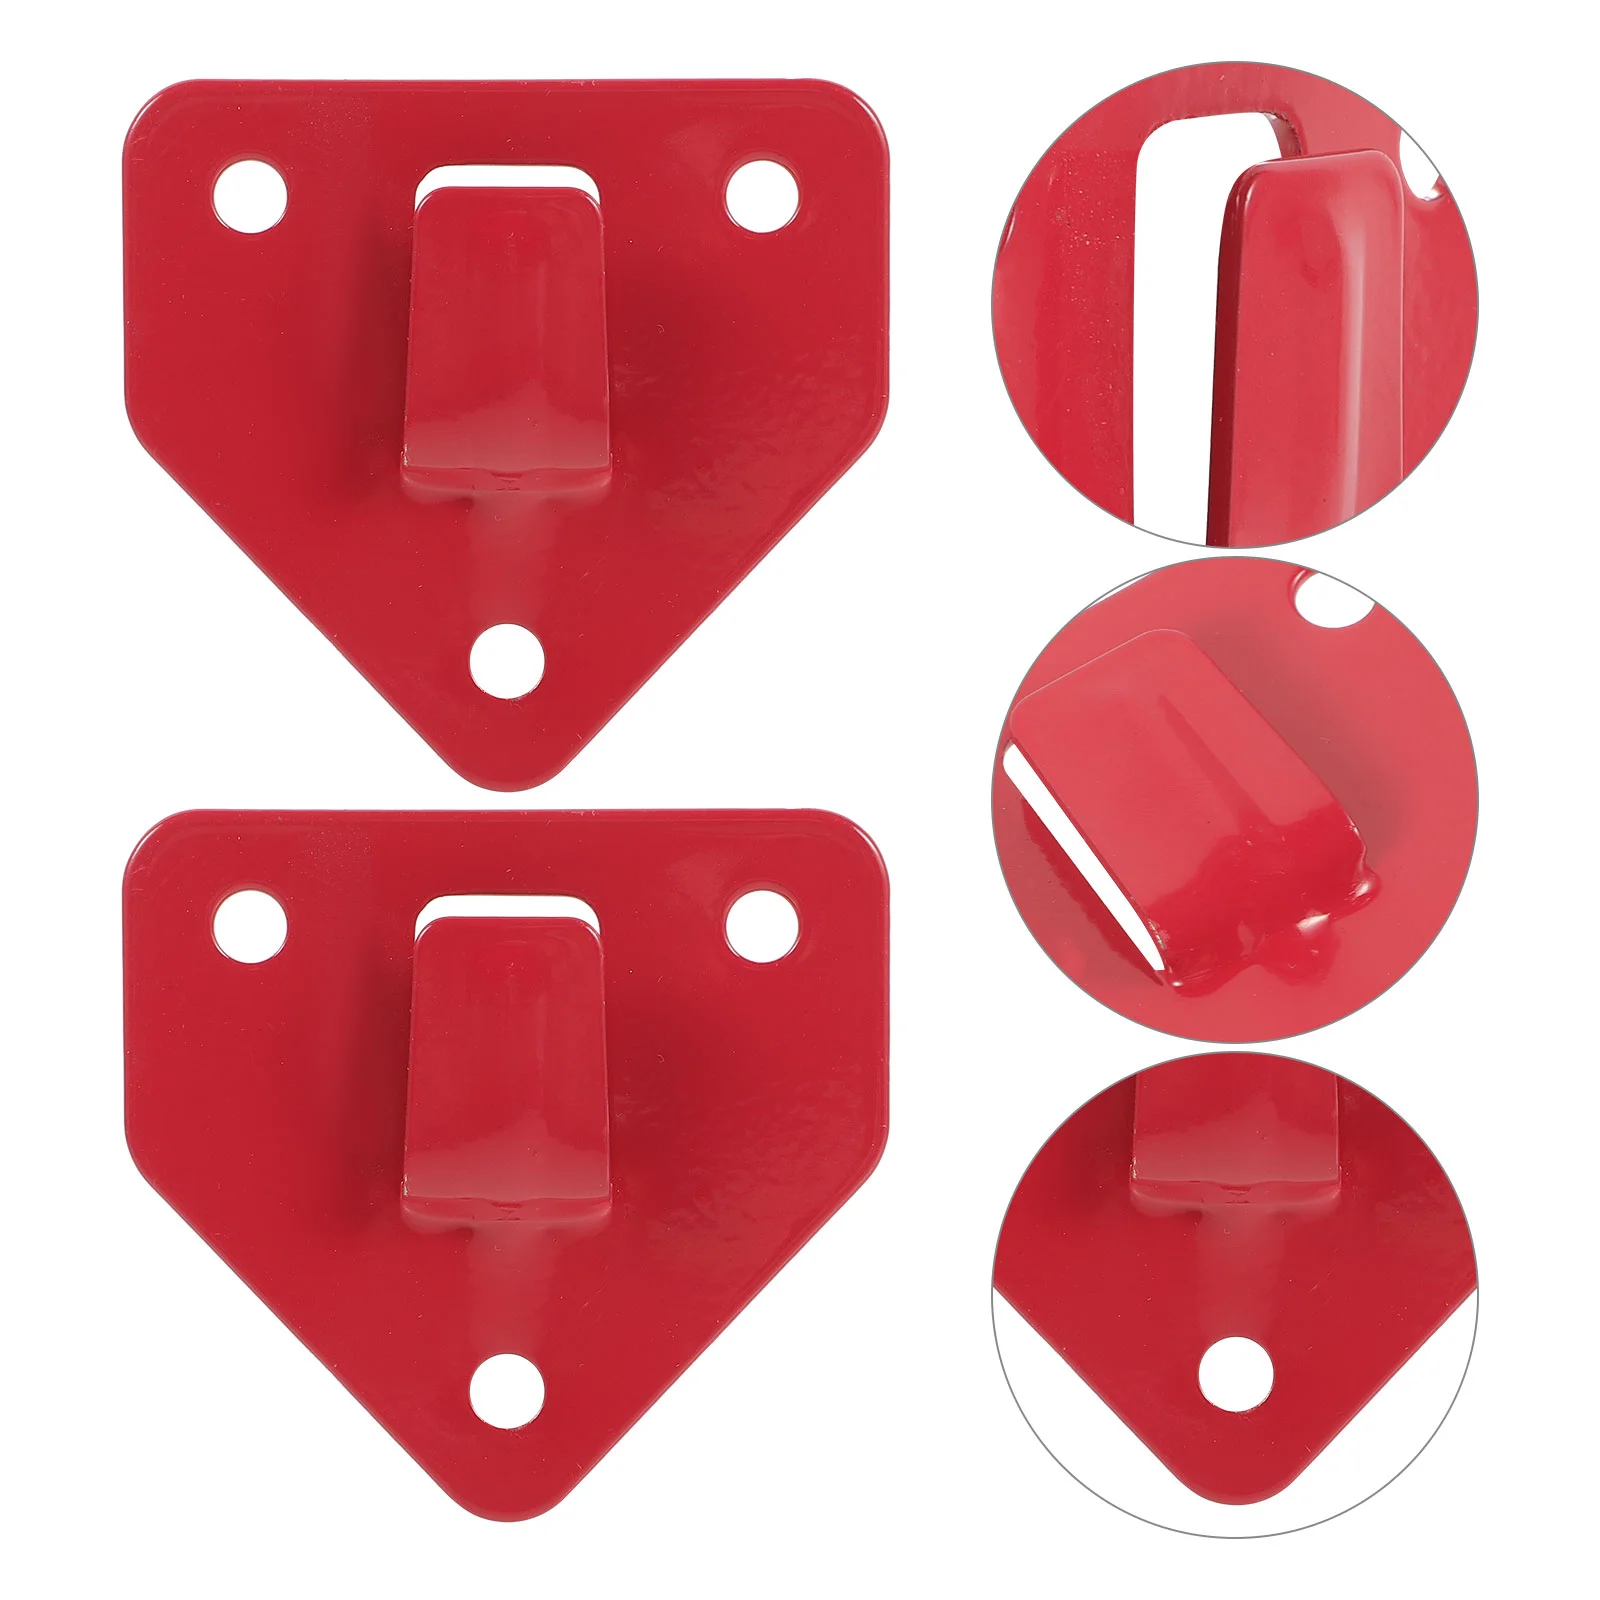 

8 Pcs Fire Extinguisher Hanger Bracket for Wall Mounting Hook Household Holder Iron Home